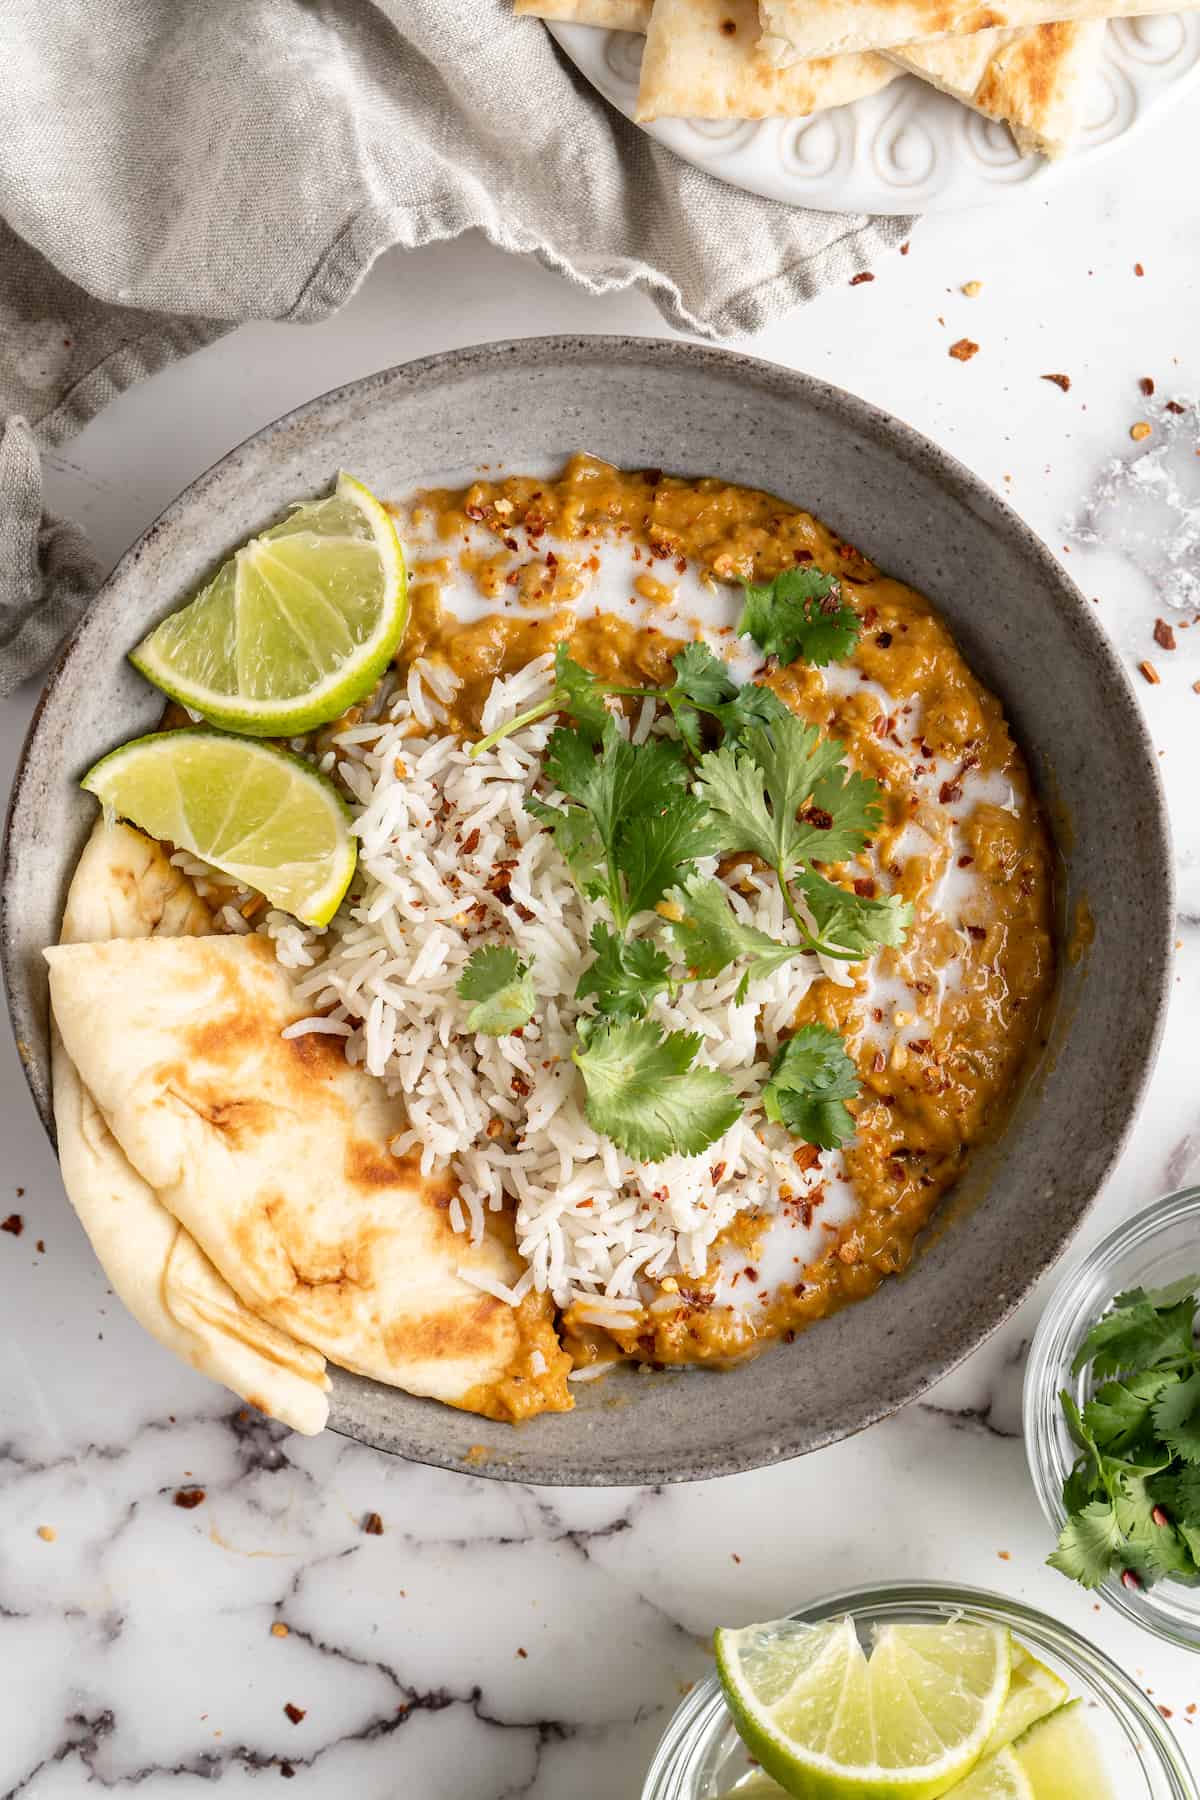 Bowl of red lentil curry with naan and rice